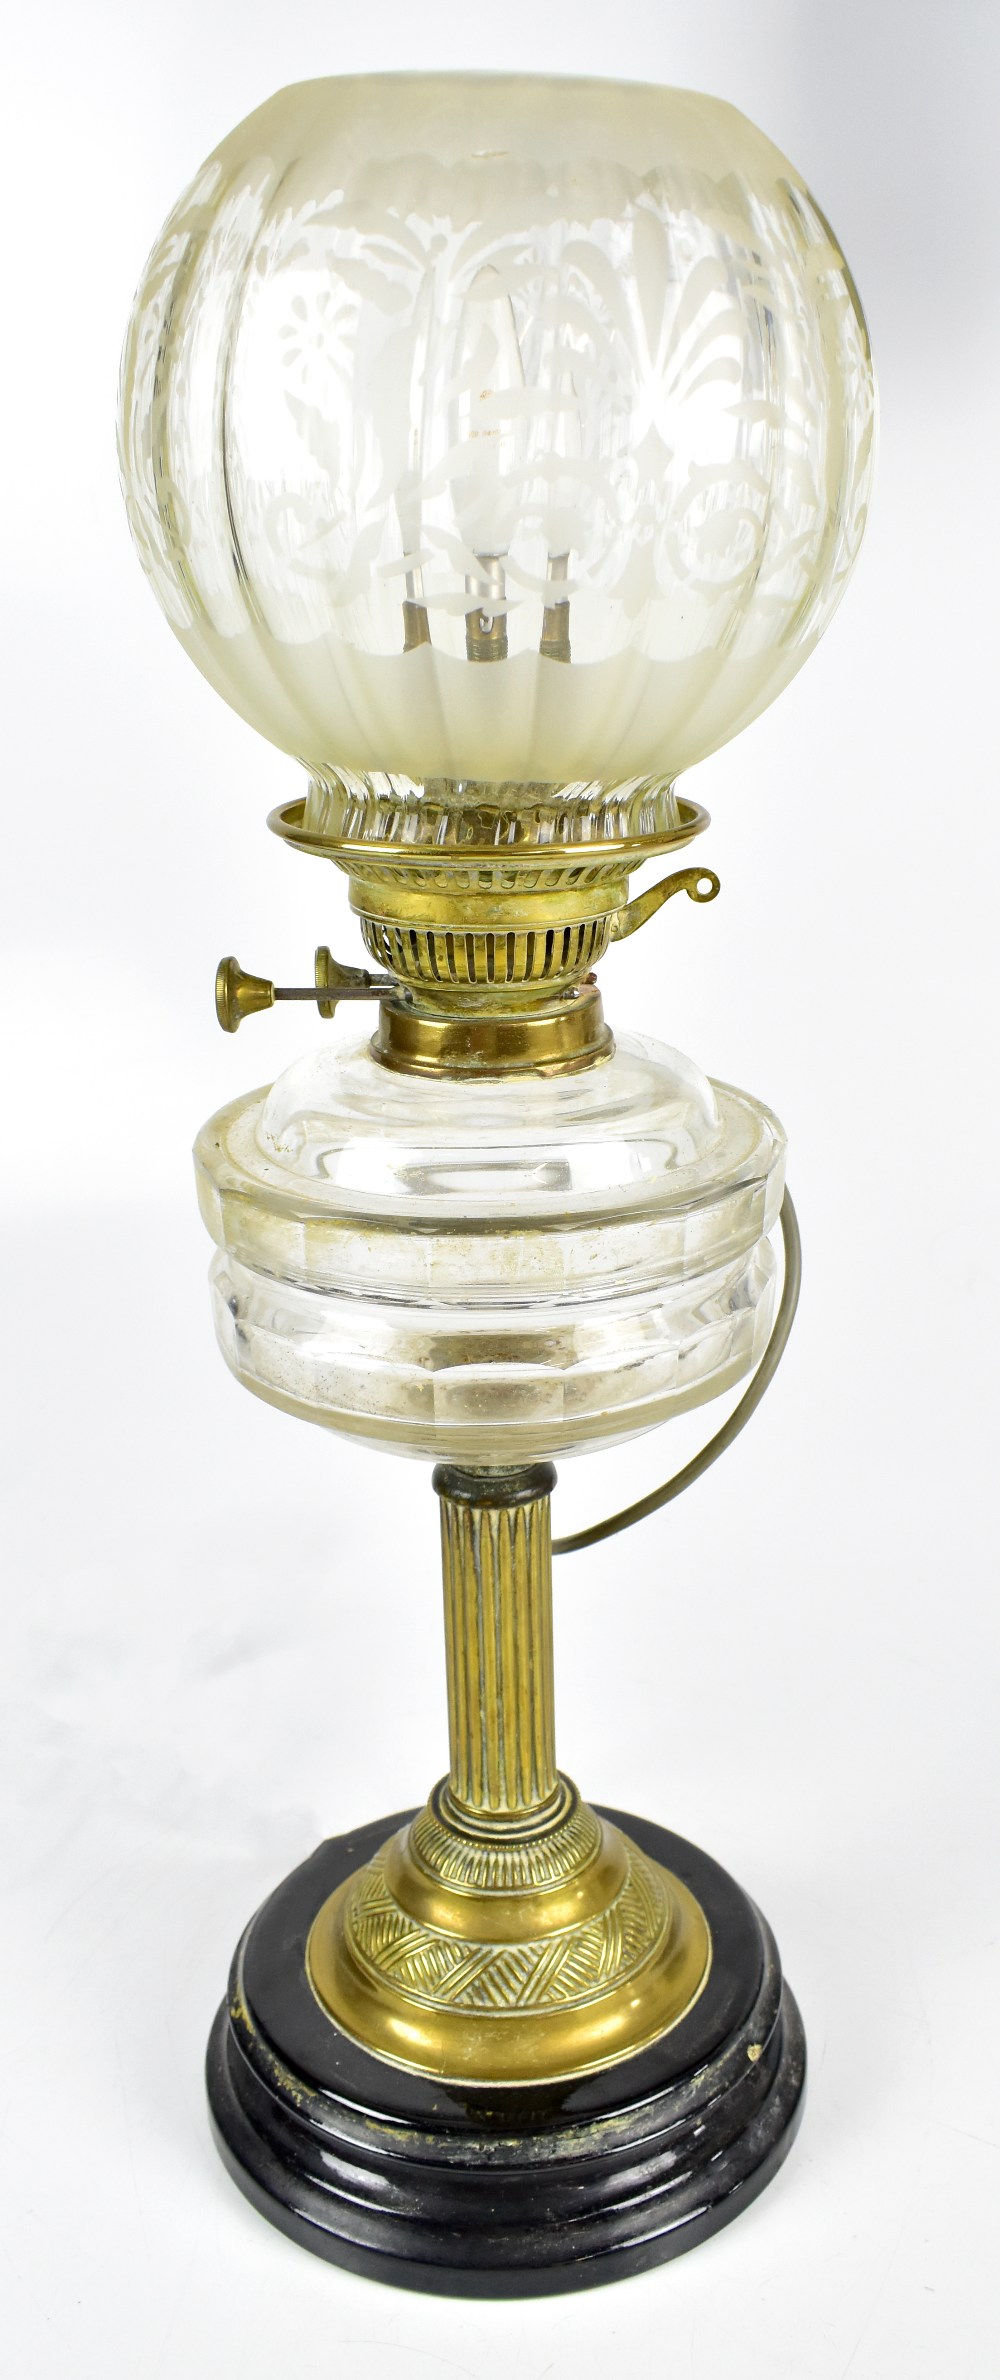 A late 19th century oil lamp with clear glass reservoir and frosted glass shade, height 56cm (